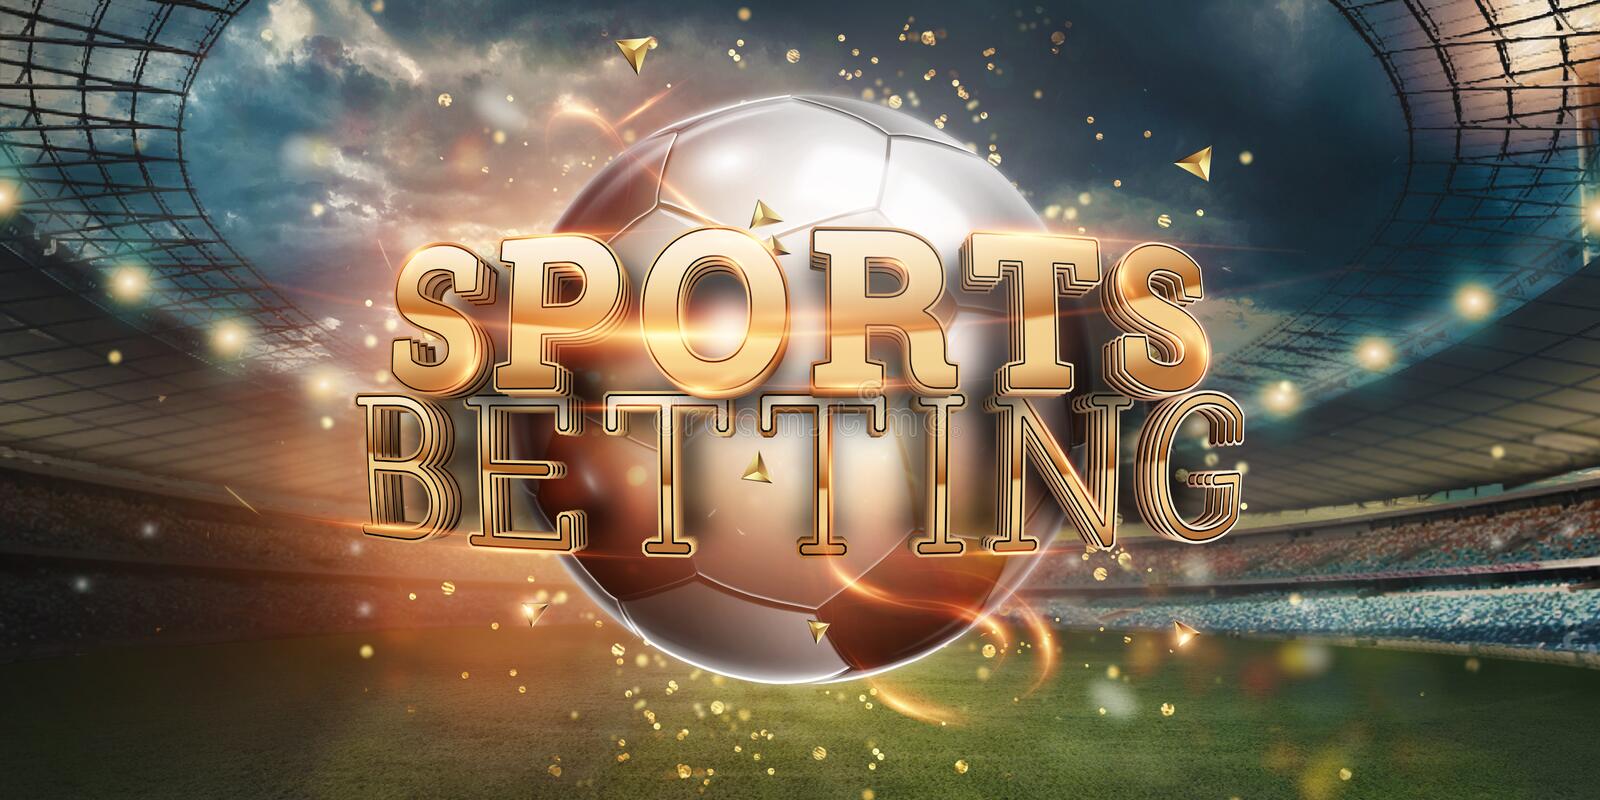 How to bet on football and win: understand the types of sports betting markets